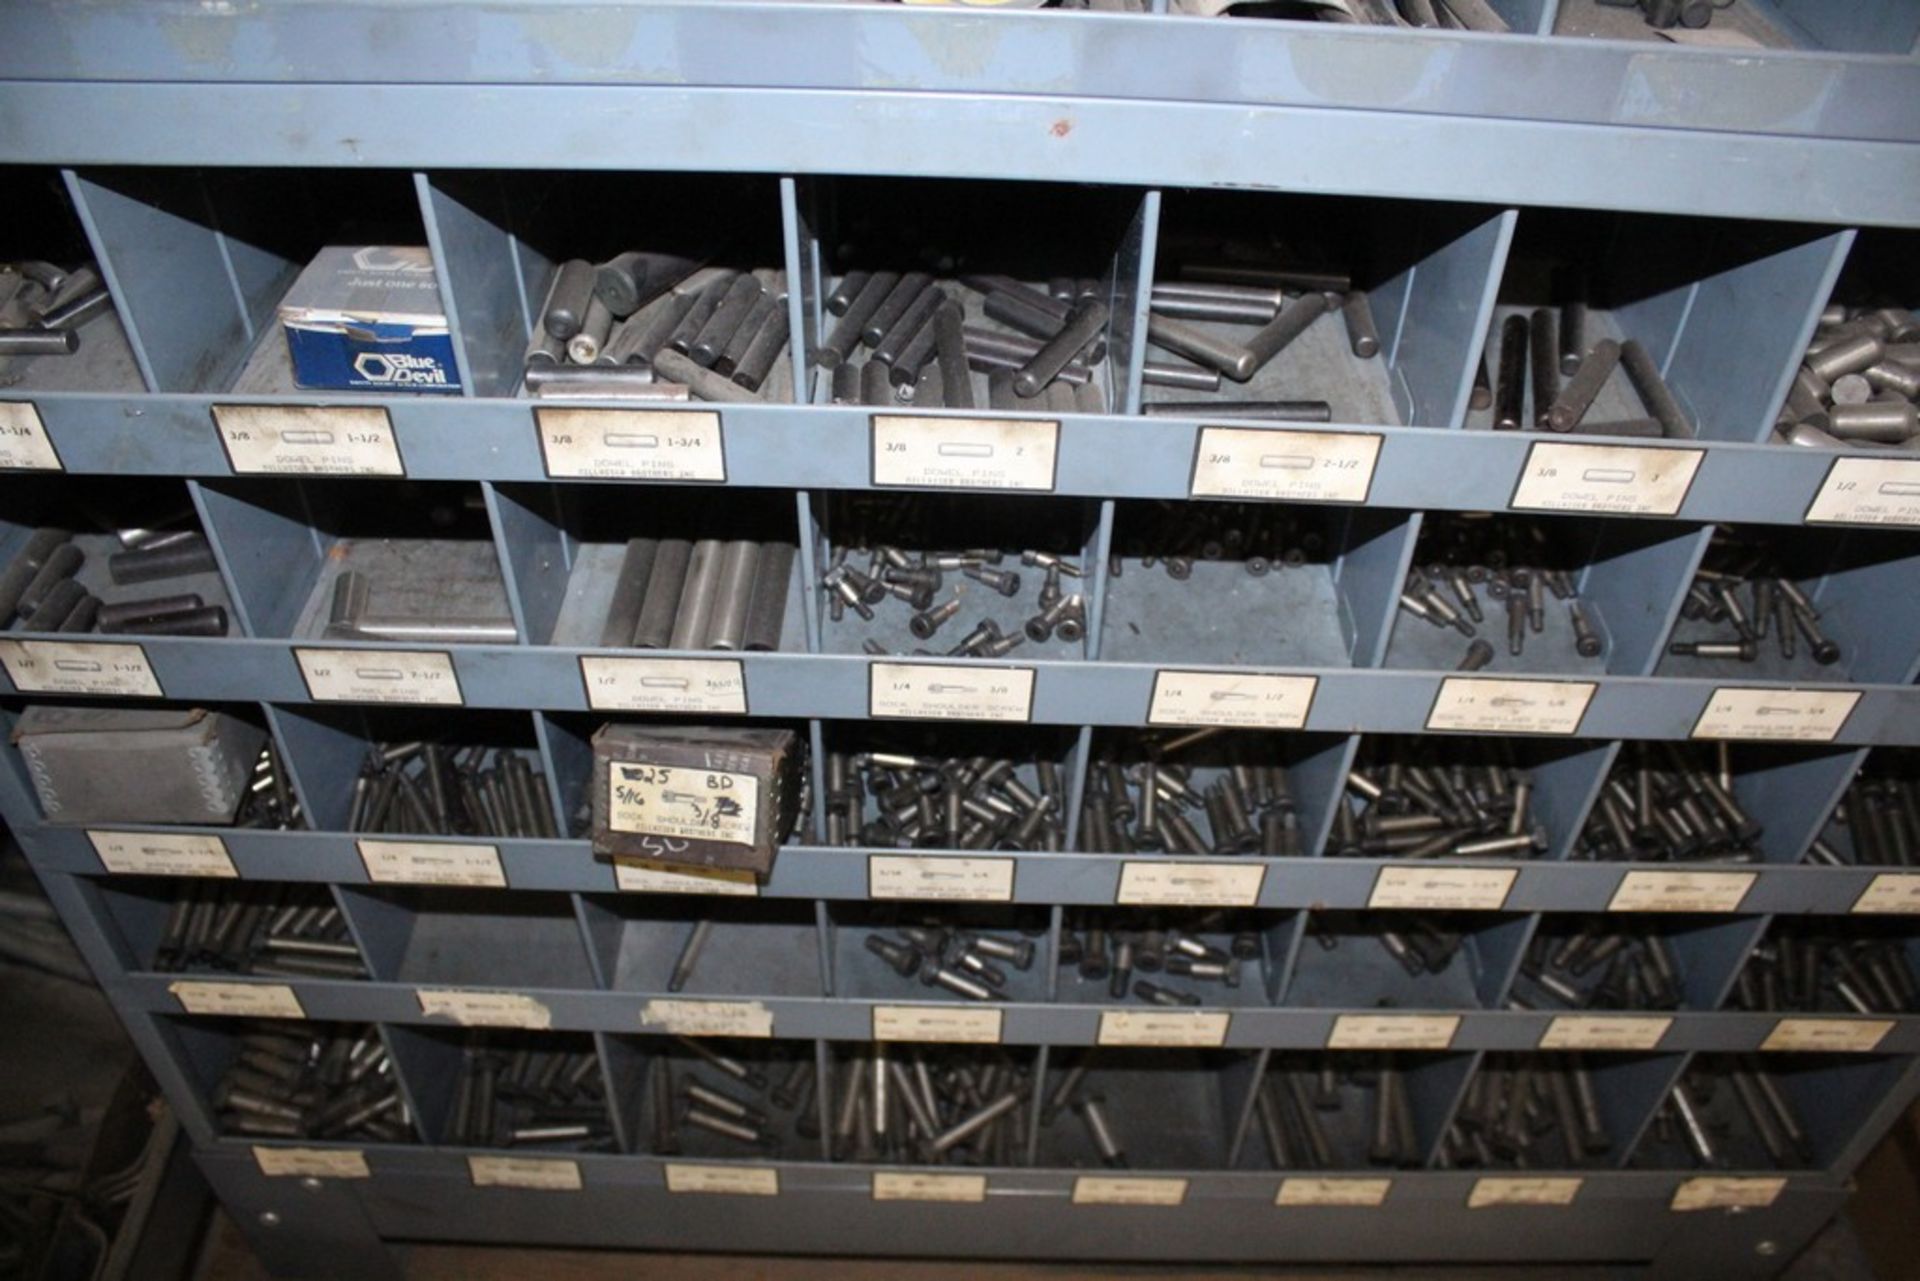 (3) 32 SLOT PIGEON HOLE PARTS CABINETS AND CONTENTS OF SORTED SET SCREWS, DOWEL PINS AND SHOULDER - Image 3 of 3